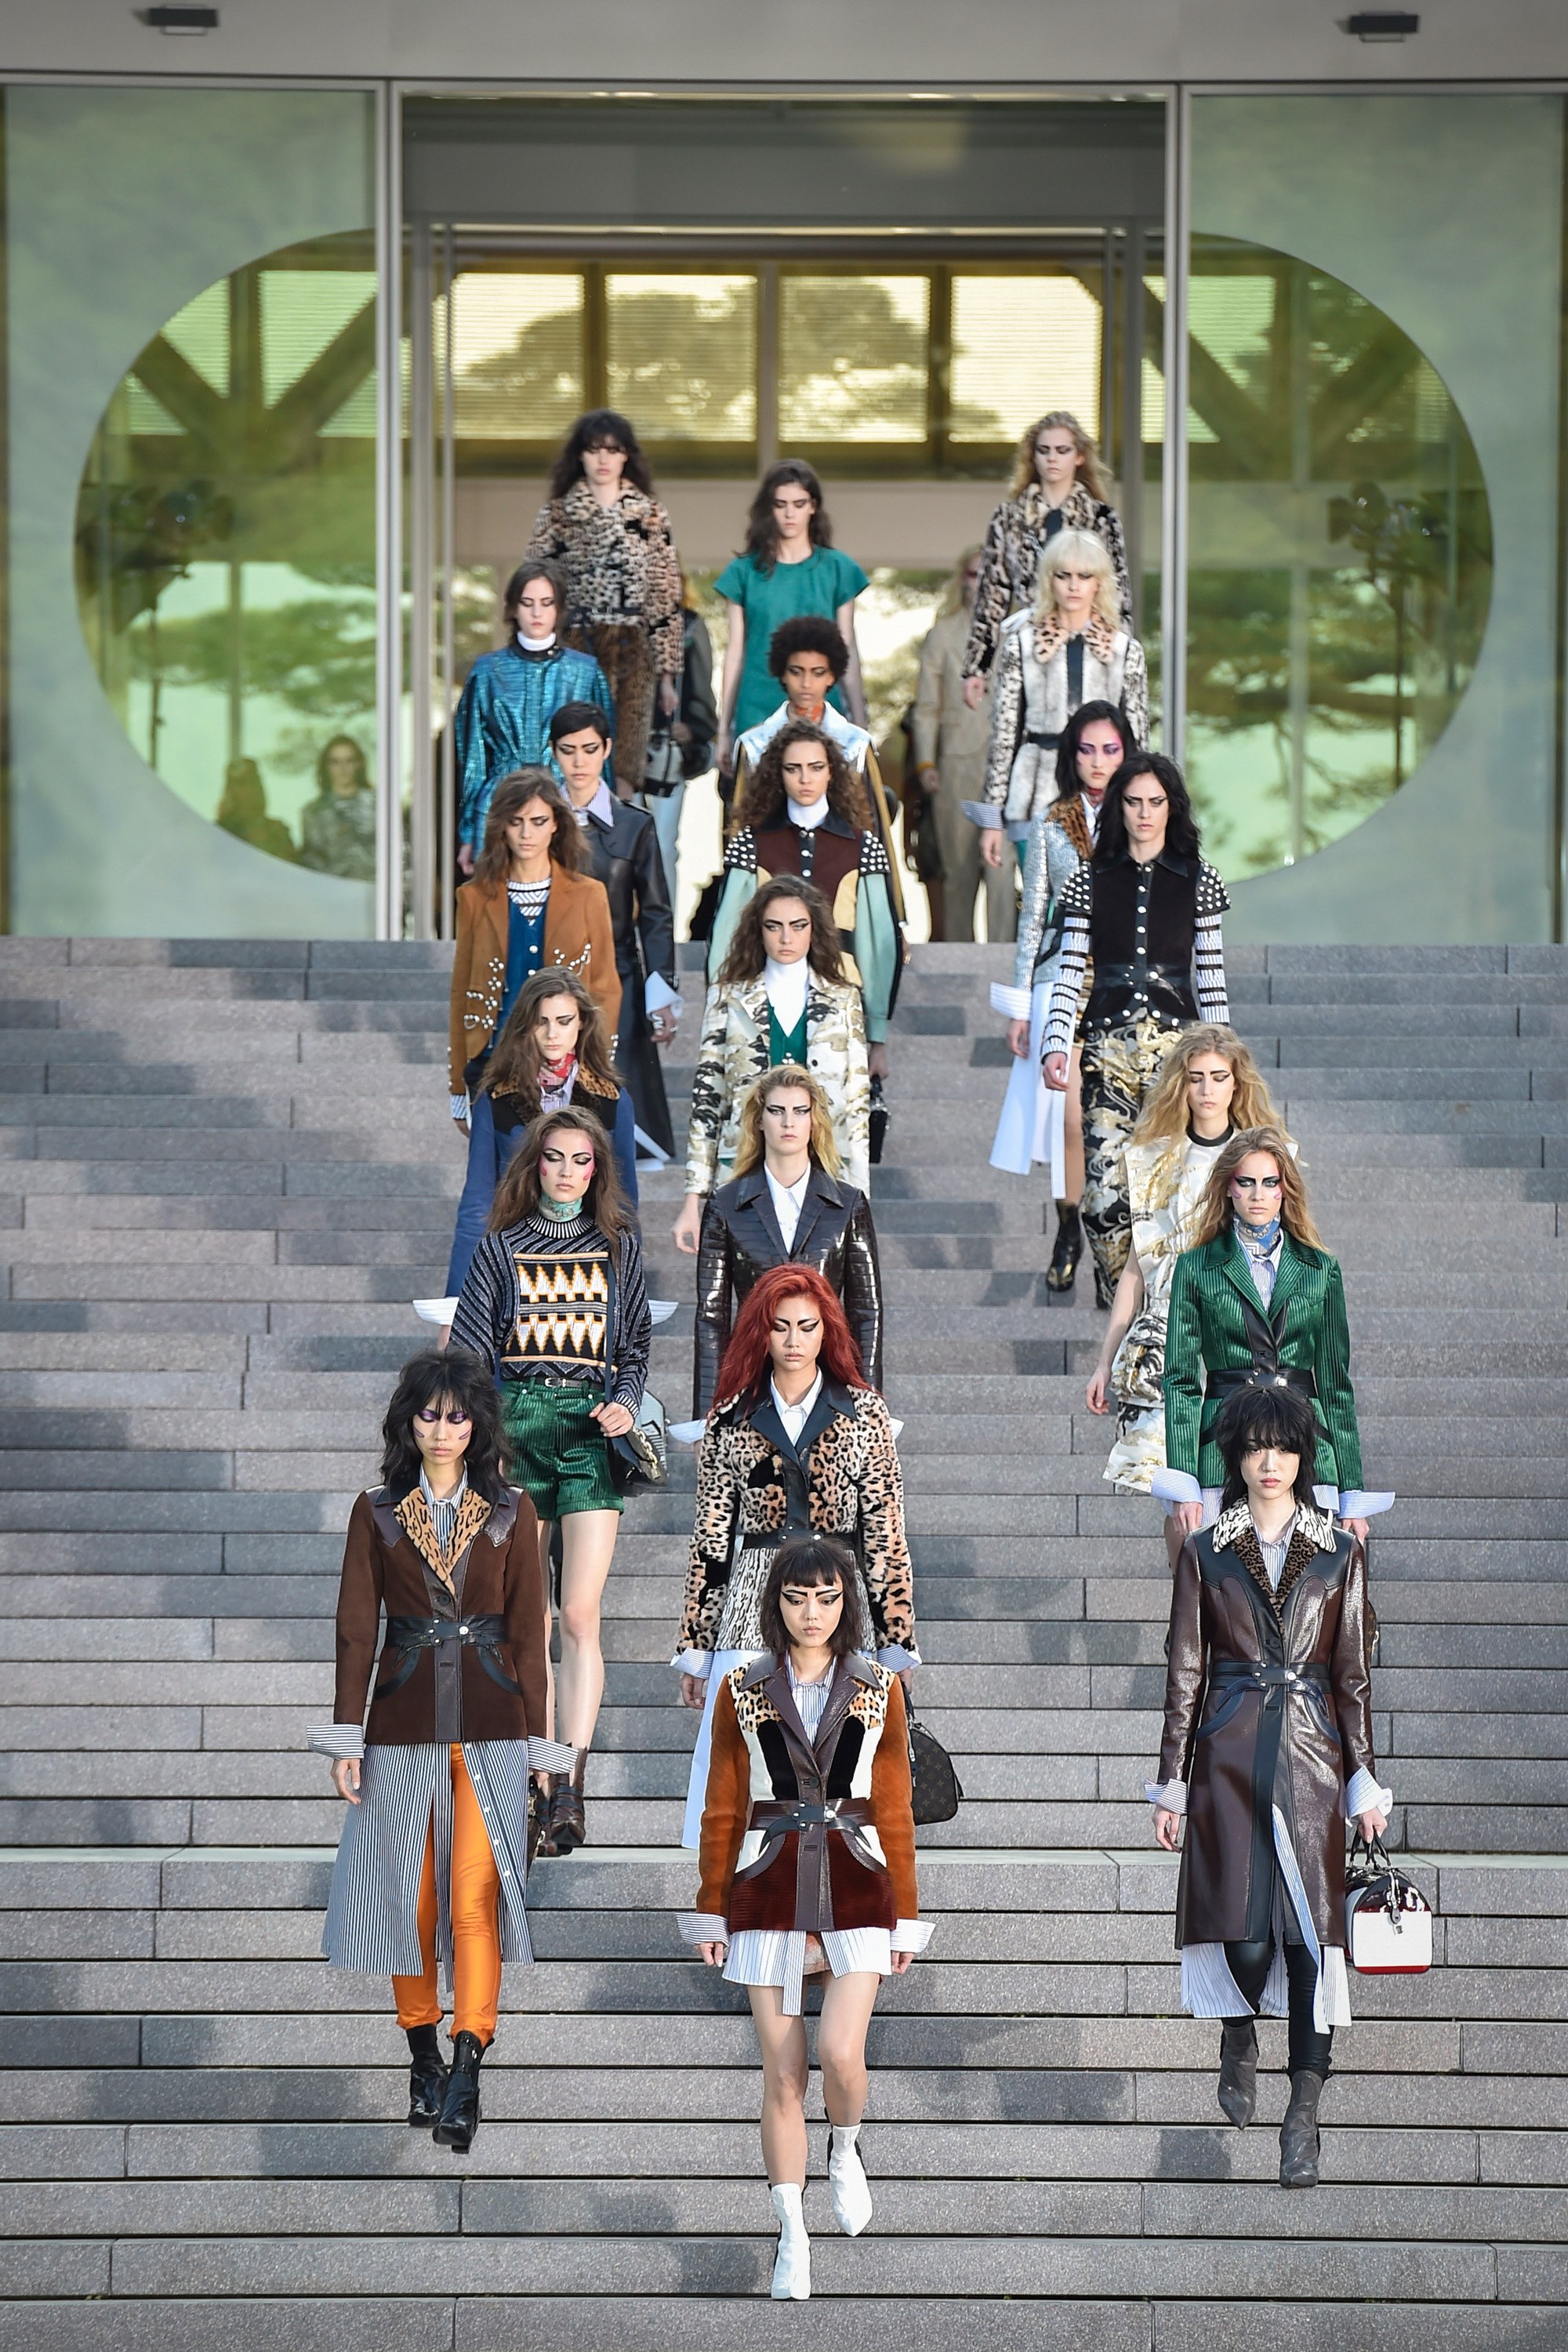 Photo #19fd9 from Louis Vuitton Cruise 2018